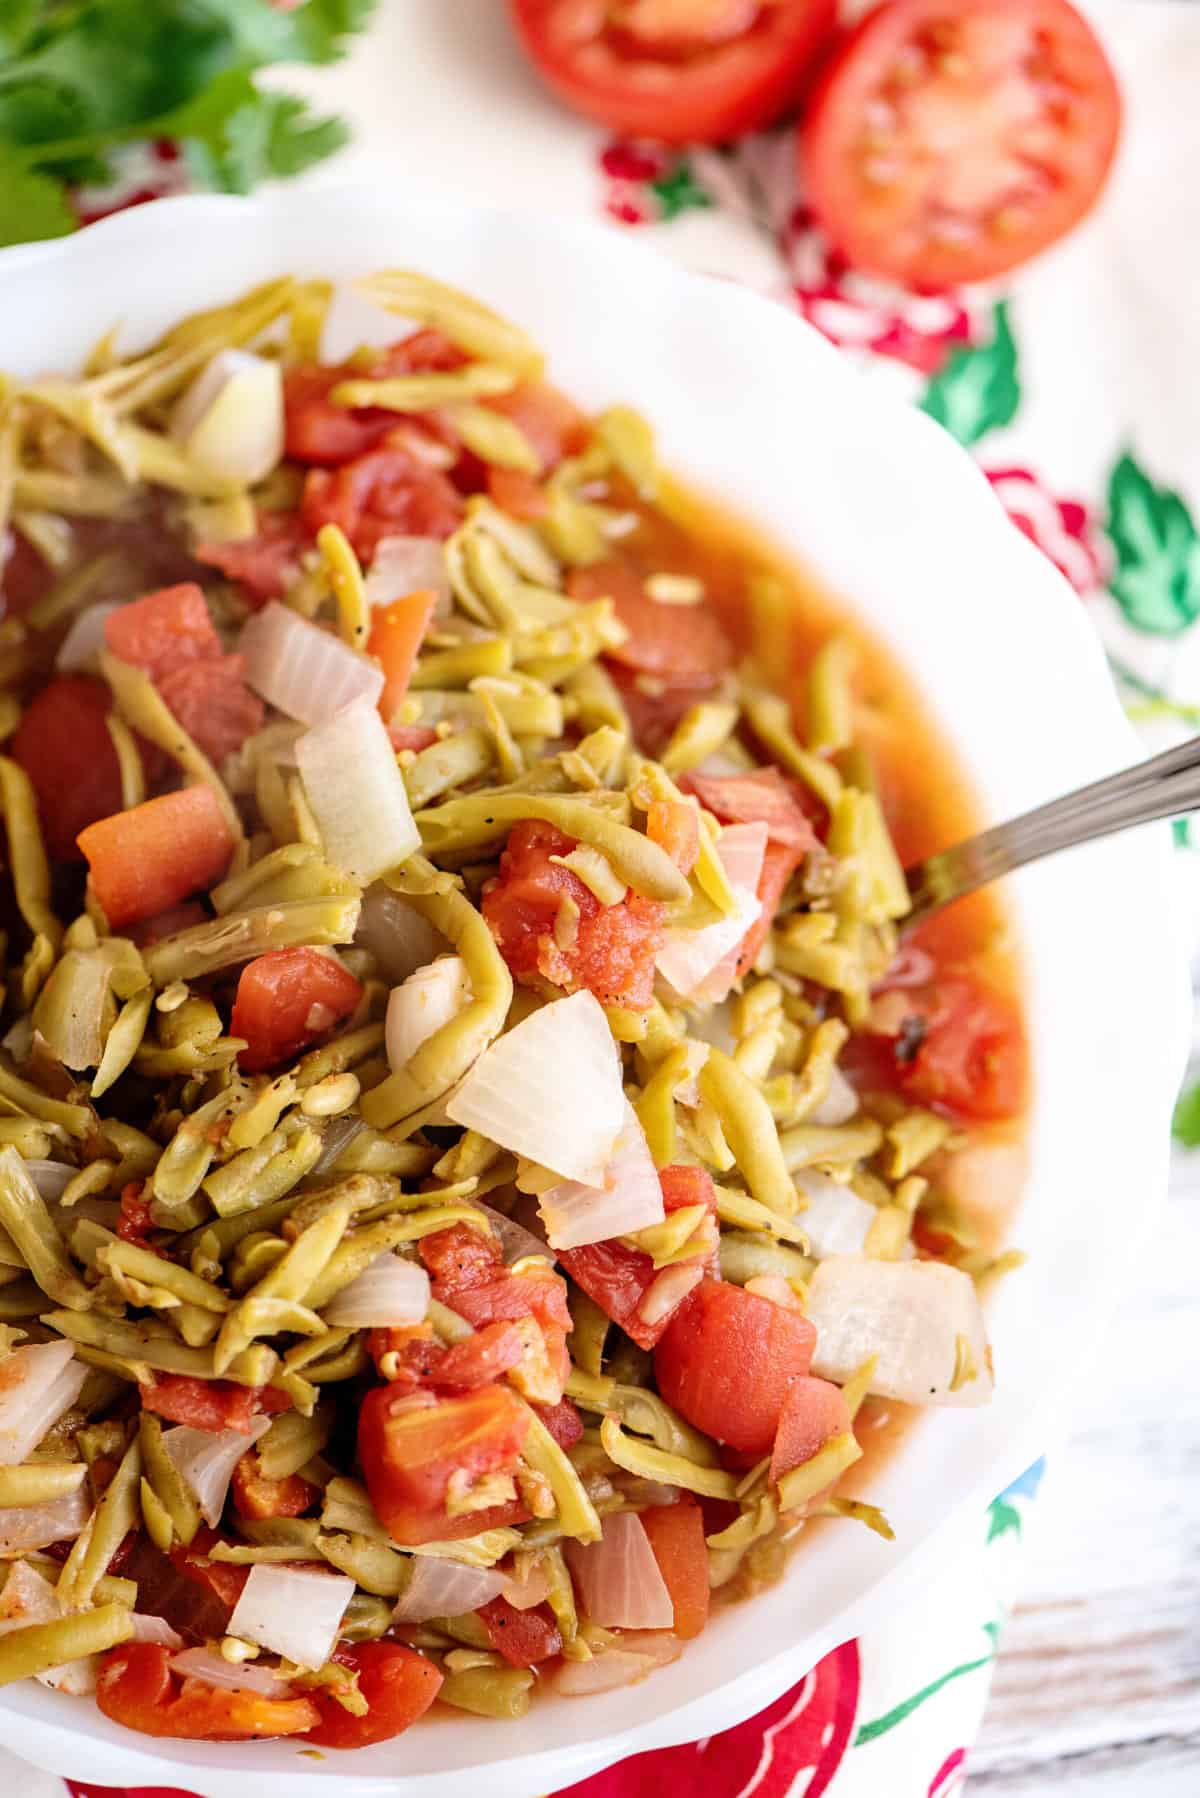 A bowl of green beans and tomatoes.